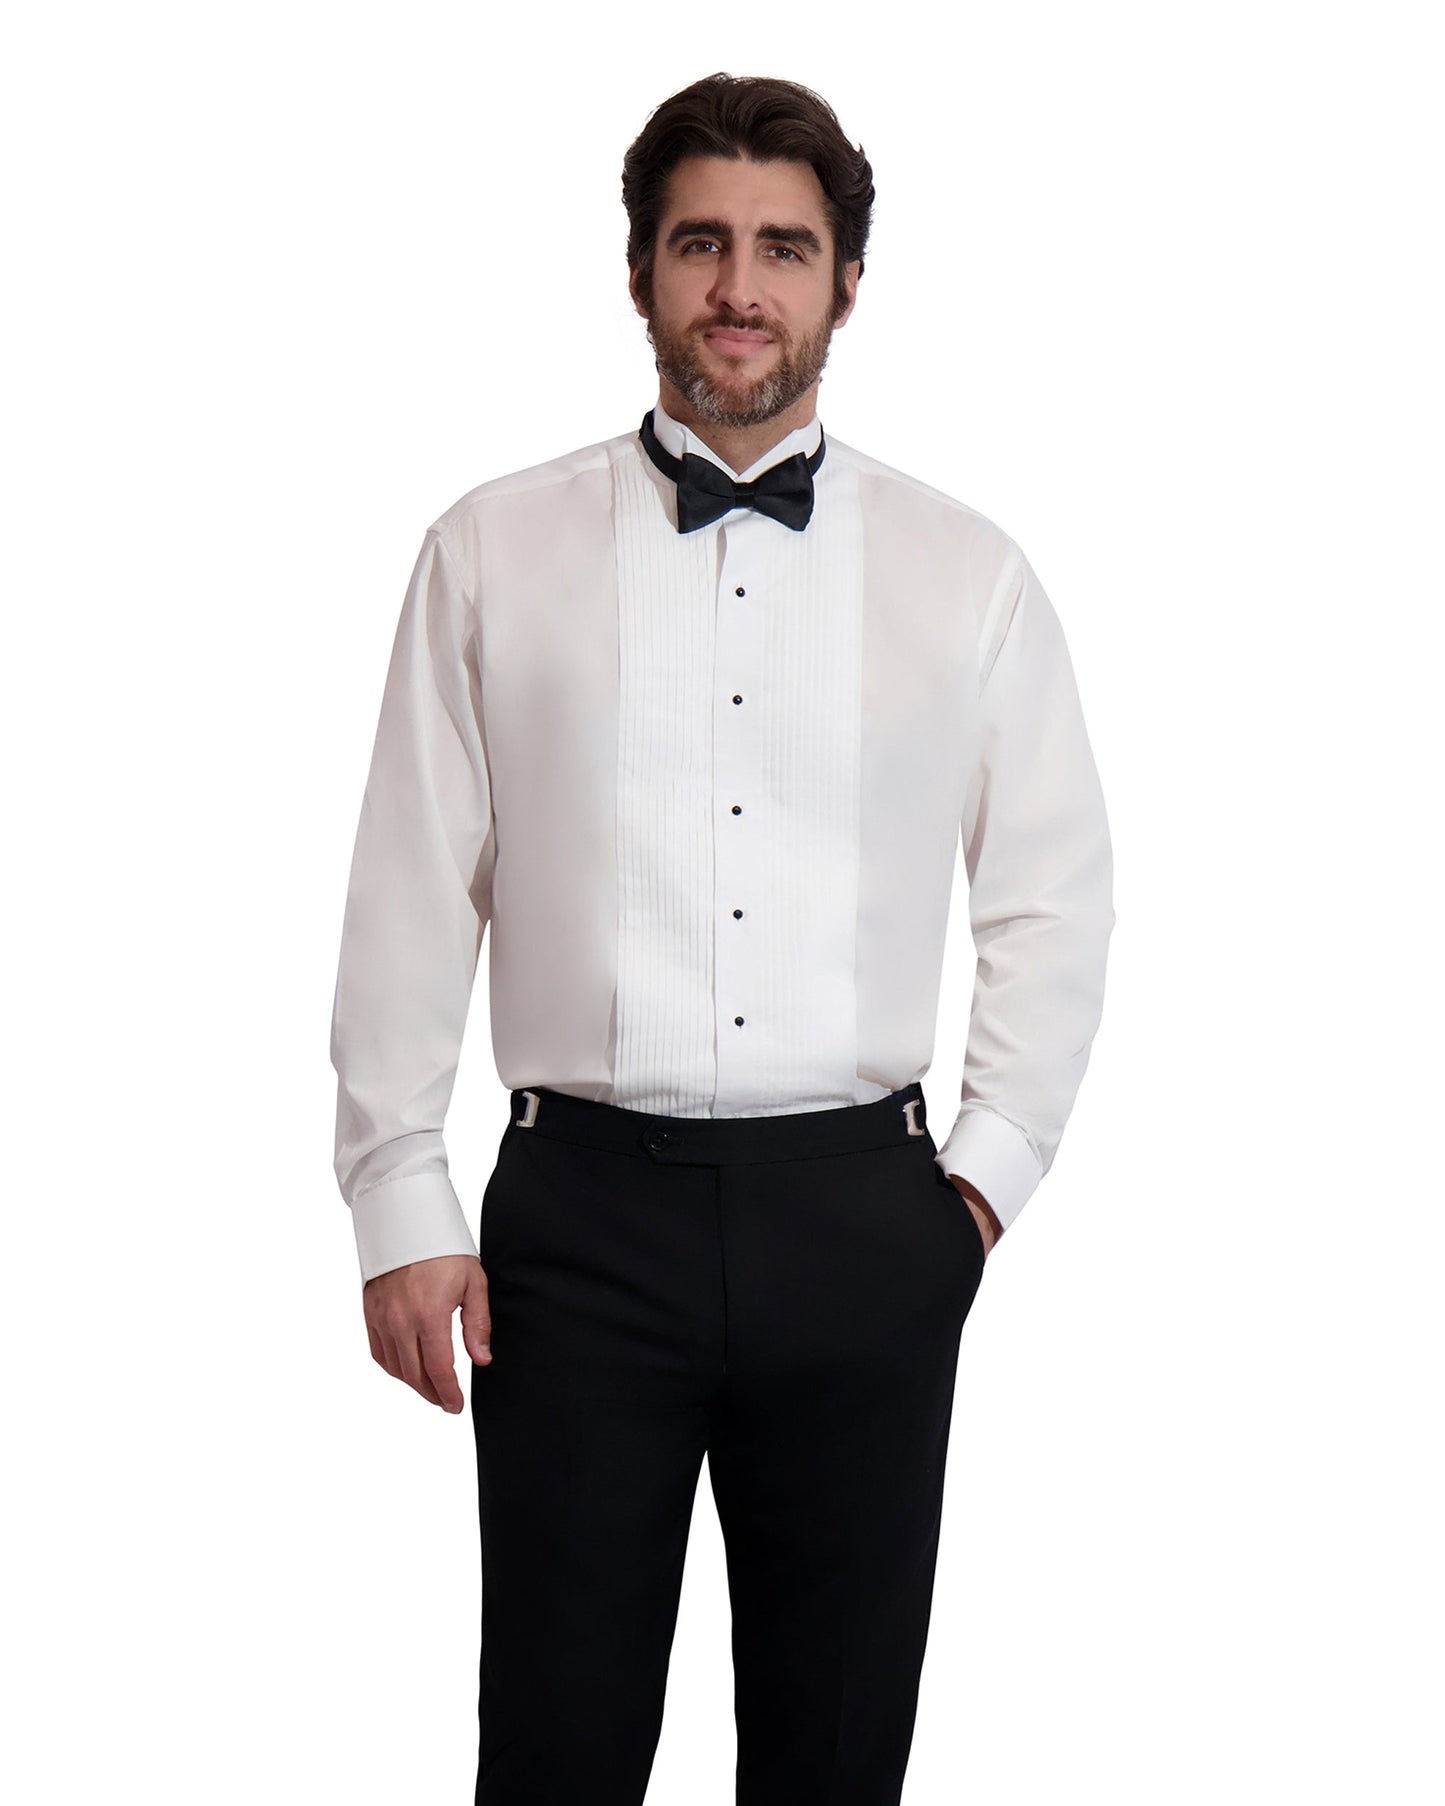 Neil Allyn Regular Fit Wing Collar Tuxedo Shirt in a Polycotton Blend with 1/4" Pleats and Barrel Cuffs